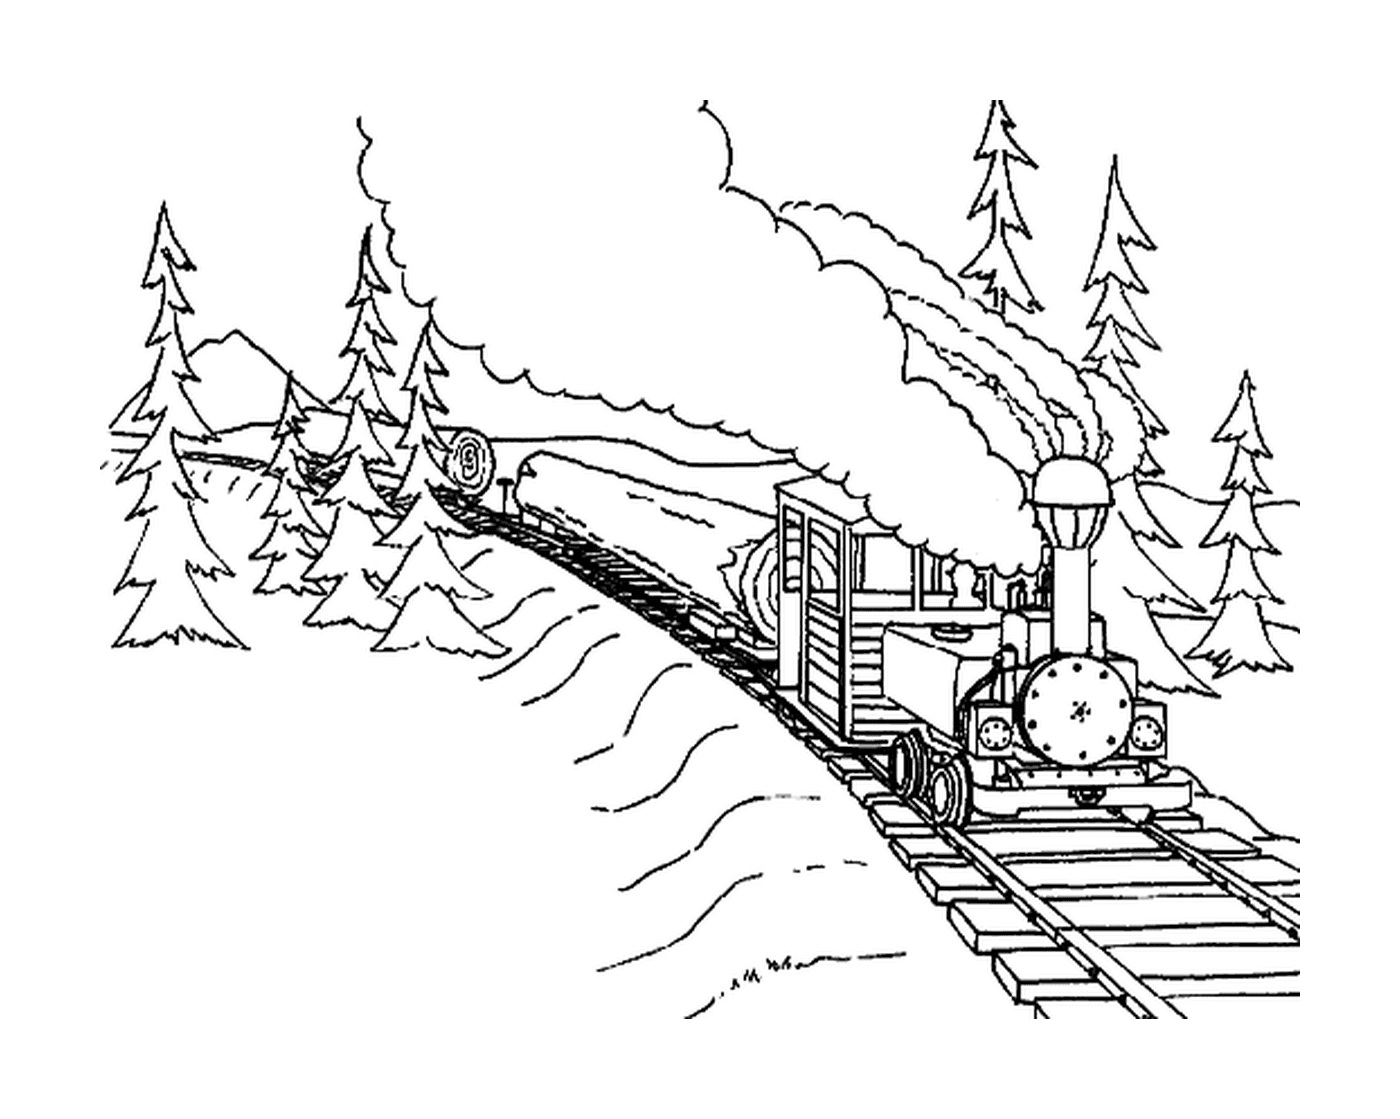  A train carrying trunks of trees 